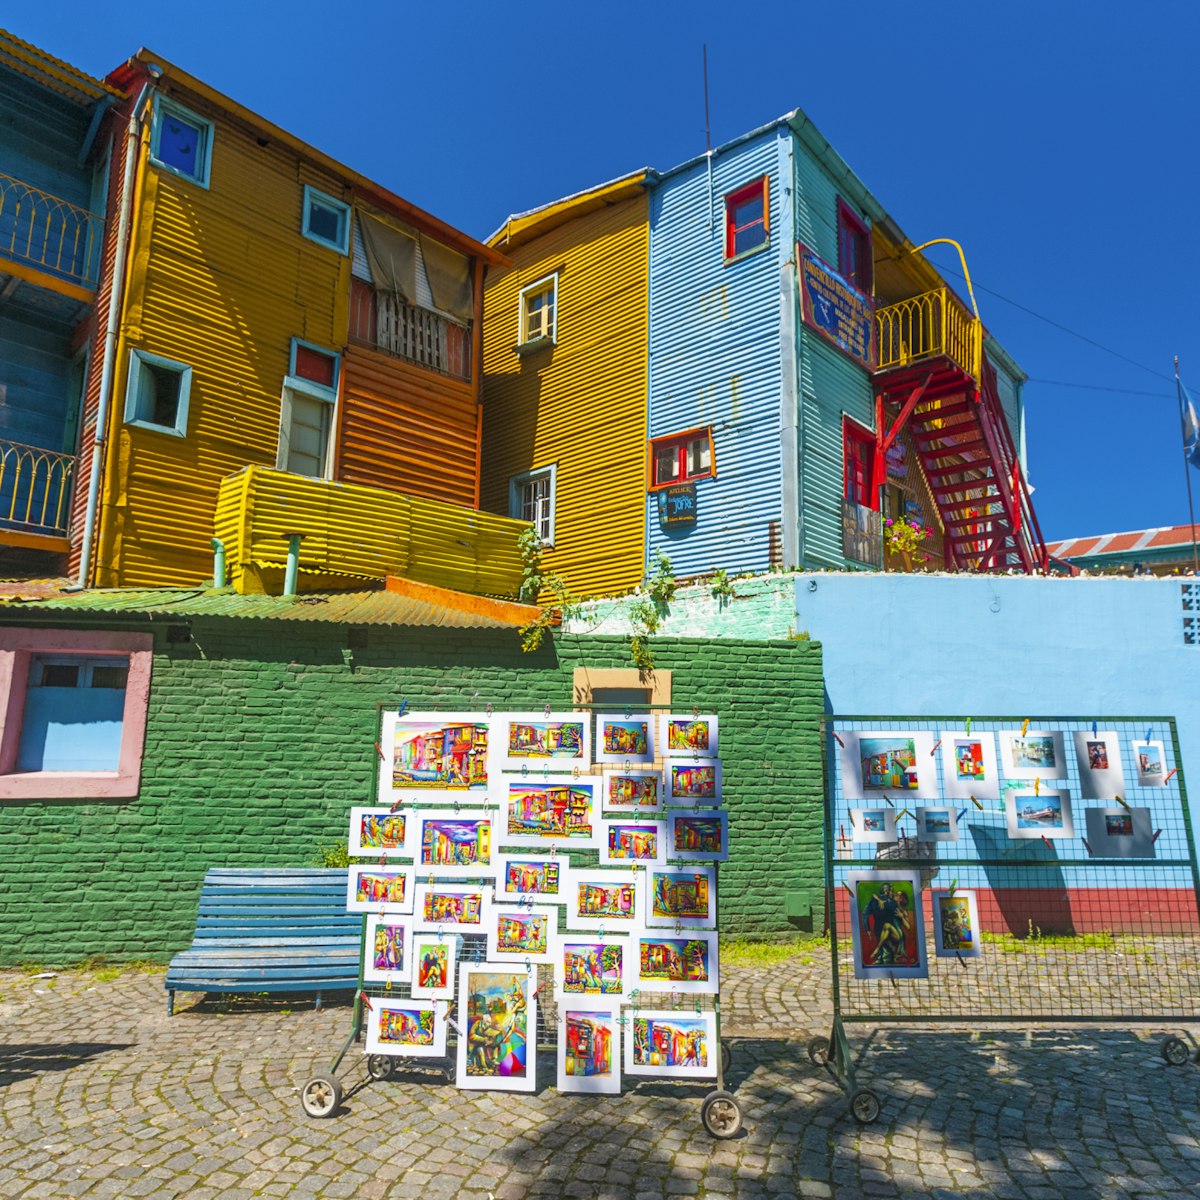 Colorful buildings and tourist souvenirs in the small street of Caminito, La Boca, Buenos Aires, Argentina.